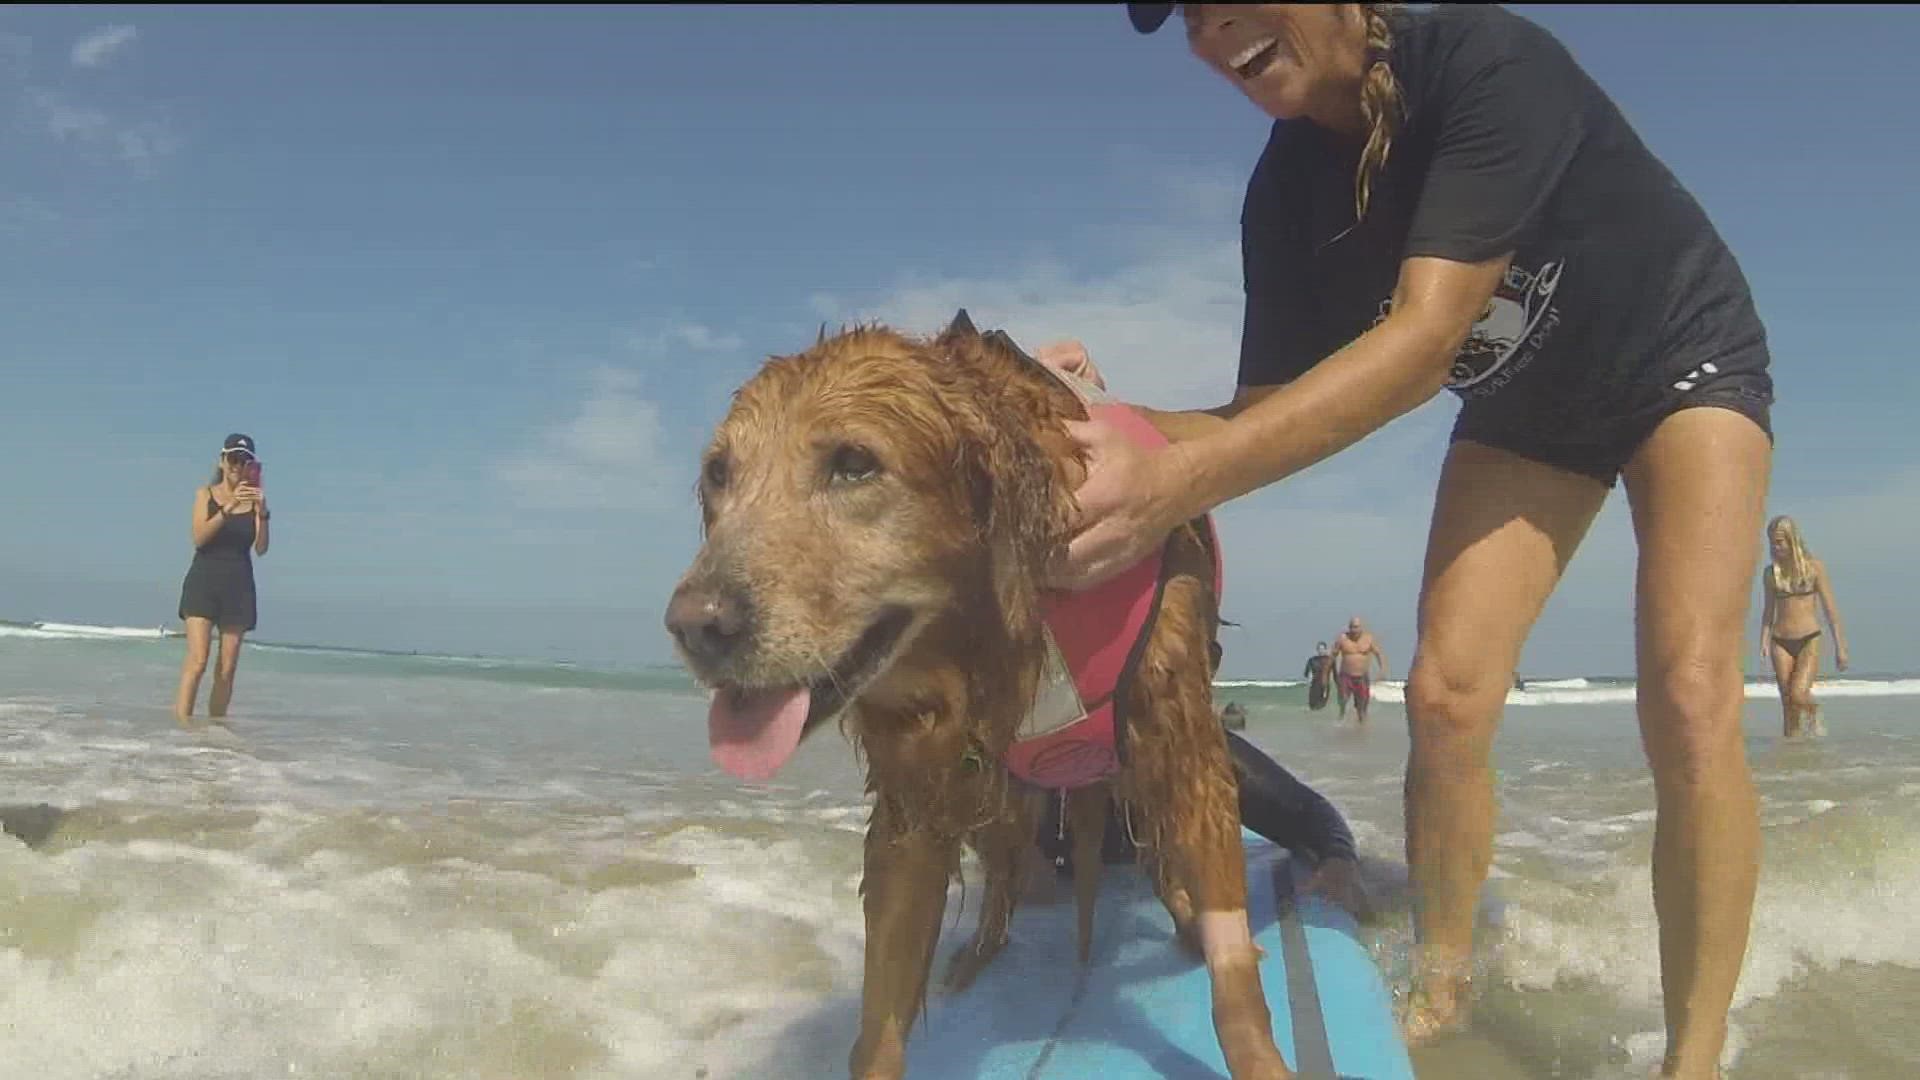 It's the final surf for one therapy dog. For 13 years Ricochet the surf dog has done just that. She's assisted special needs children and wounded veterans in surfing